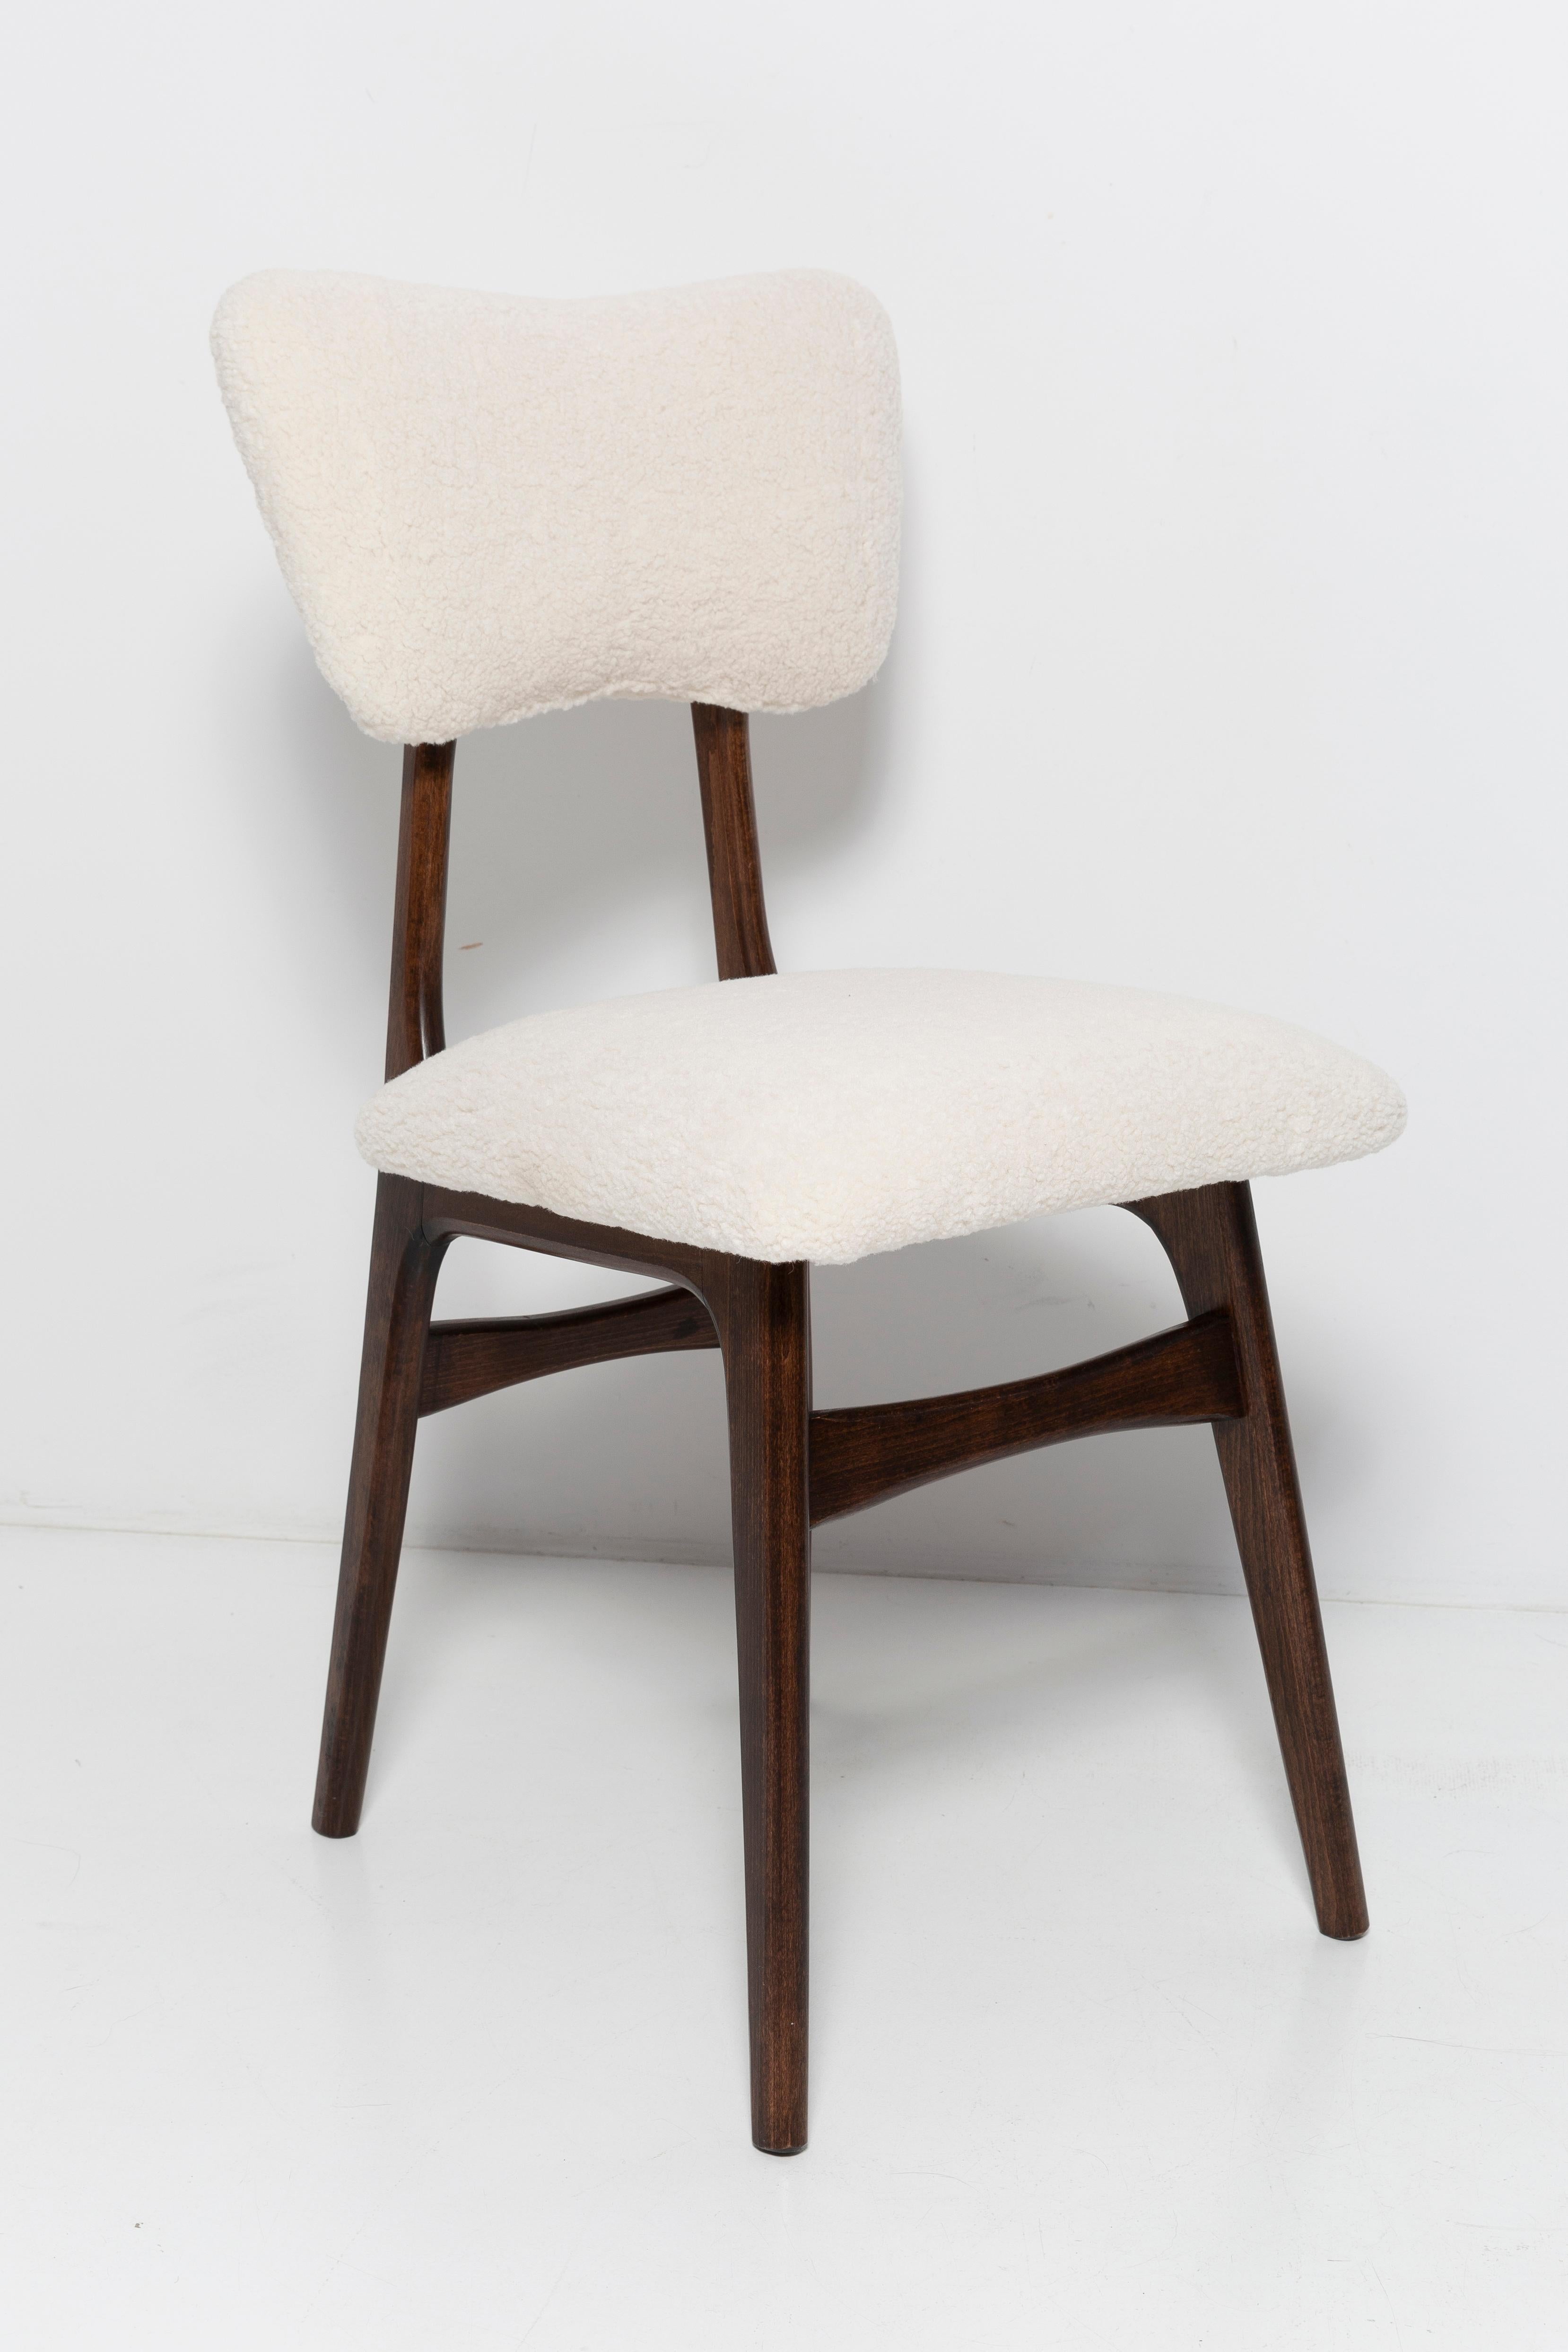 Chair designed by Prof. Rajmund Halas. Made of beechwood in walnut color. Chair is after a complete upholstery renovation; the woodwork has been refreshed. Seat and back is dressed in crème, durable and pleasant to the touch bouclé fabric (color